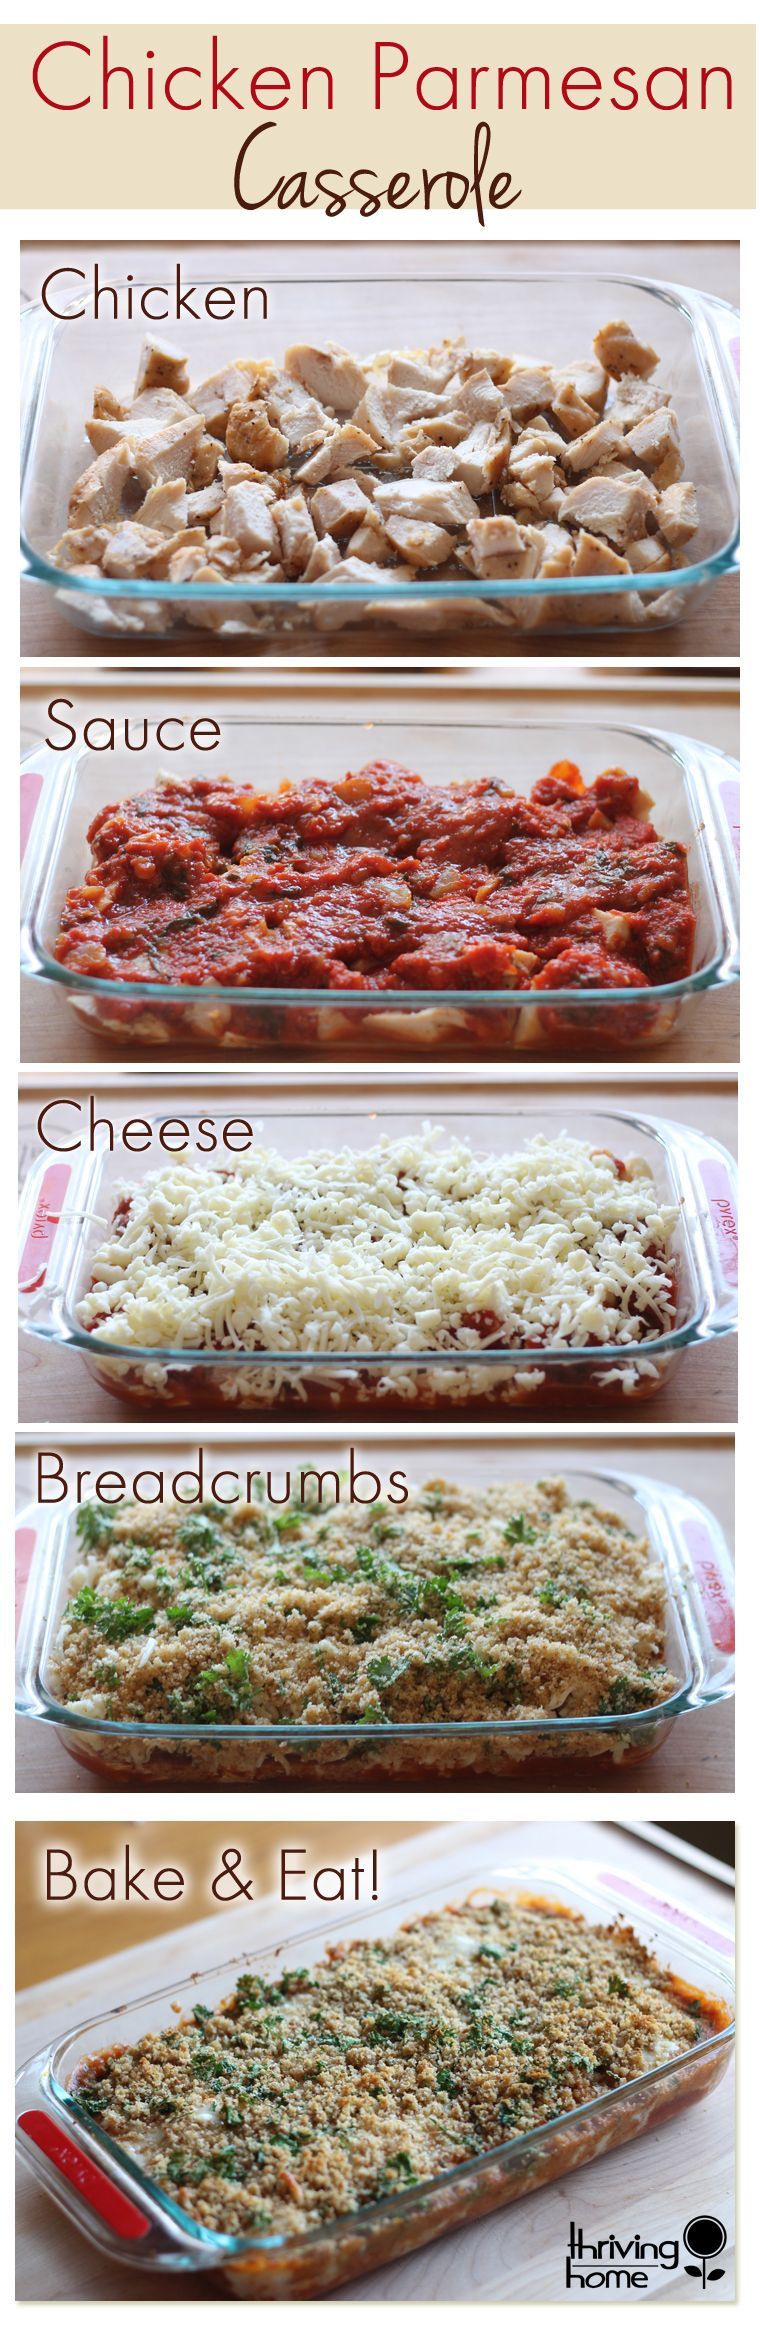 Chicken Parmesan Casserole Recipe…could add some spinach or something too